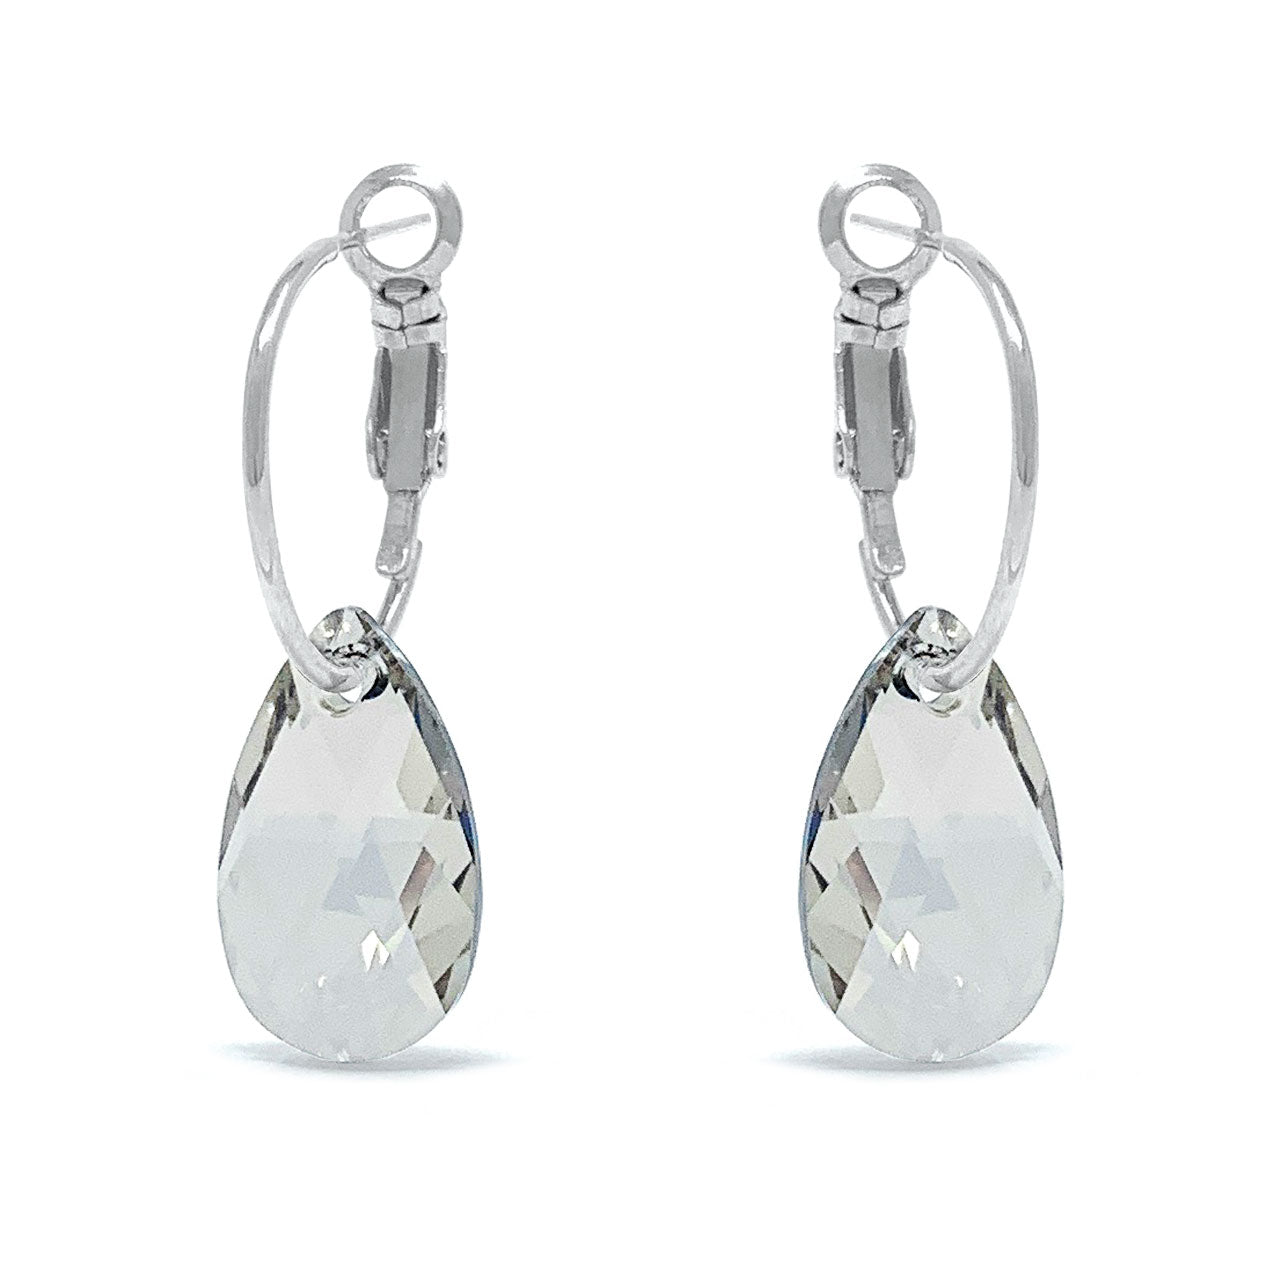 Aurora Small Drop Earrings with Grey Silver Shade Pear Crystals from Swarovski Silver Toned Rhodium Plated - Ed Heart